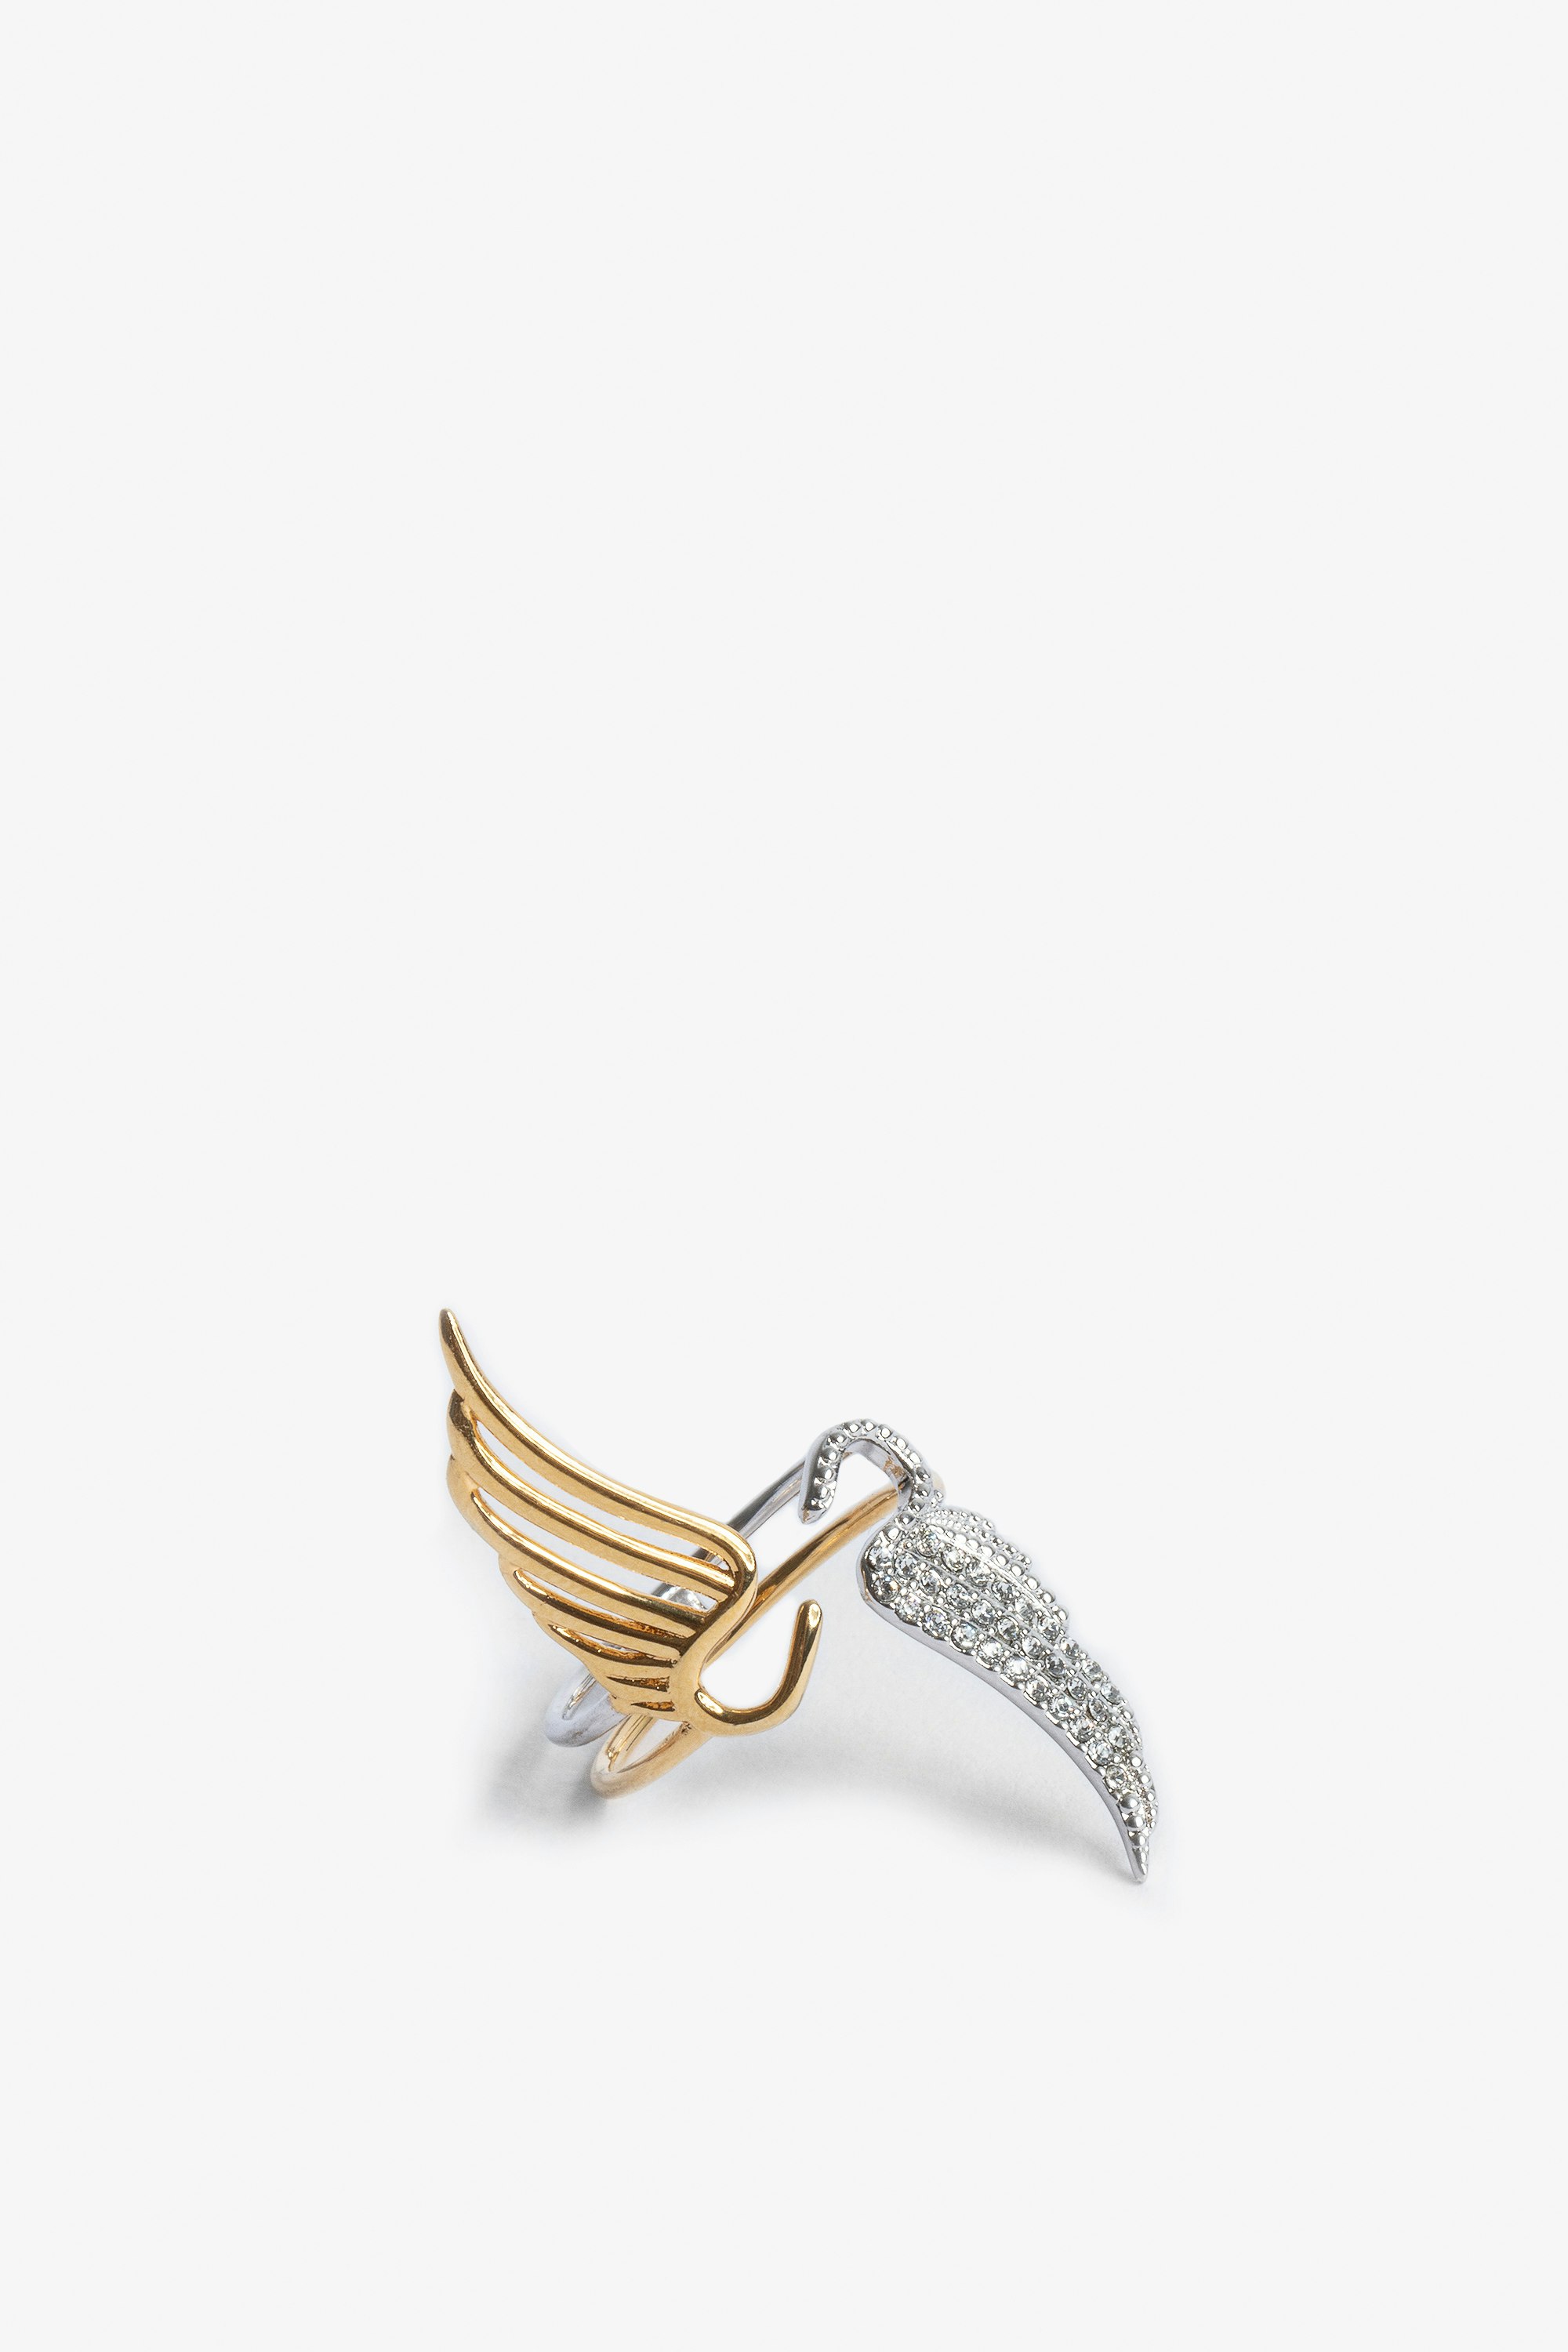 Rock Over Ring Women’s toi et moi ring with wings, gold-tone brass on one side and crystal-embellished on the other